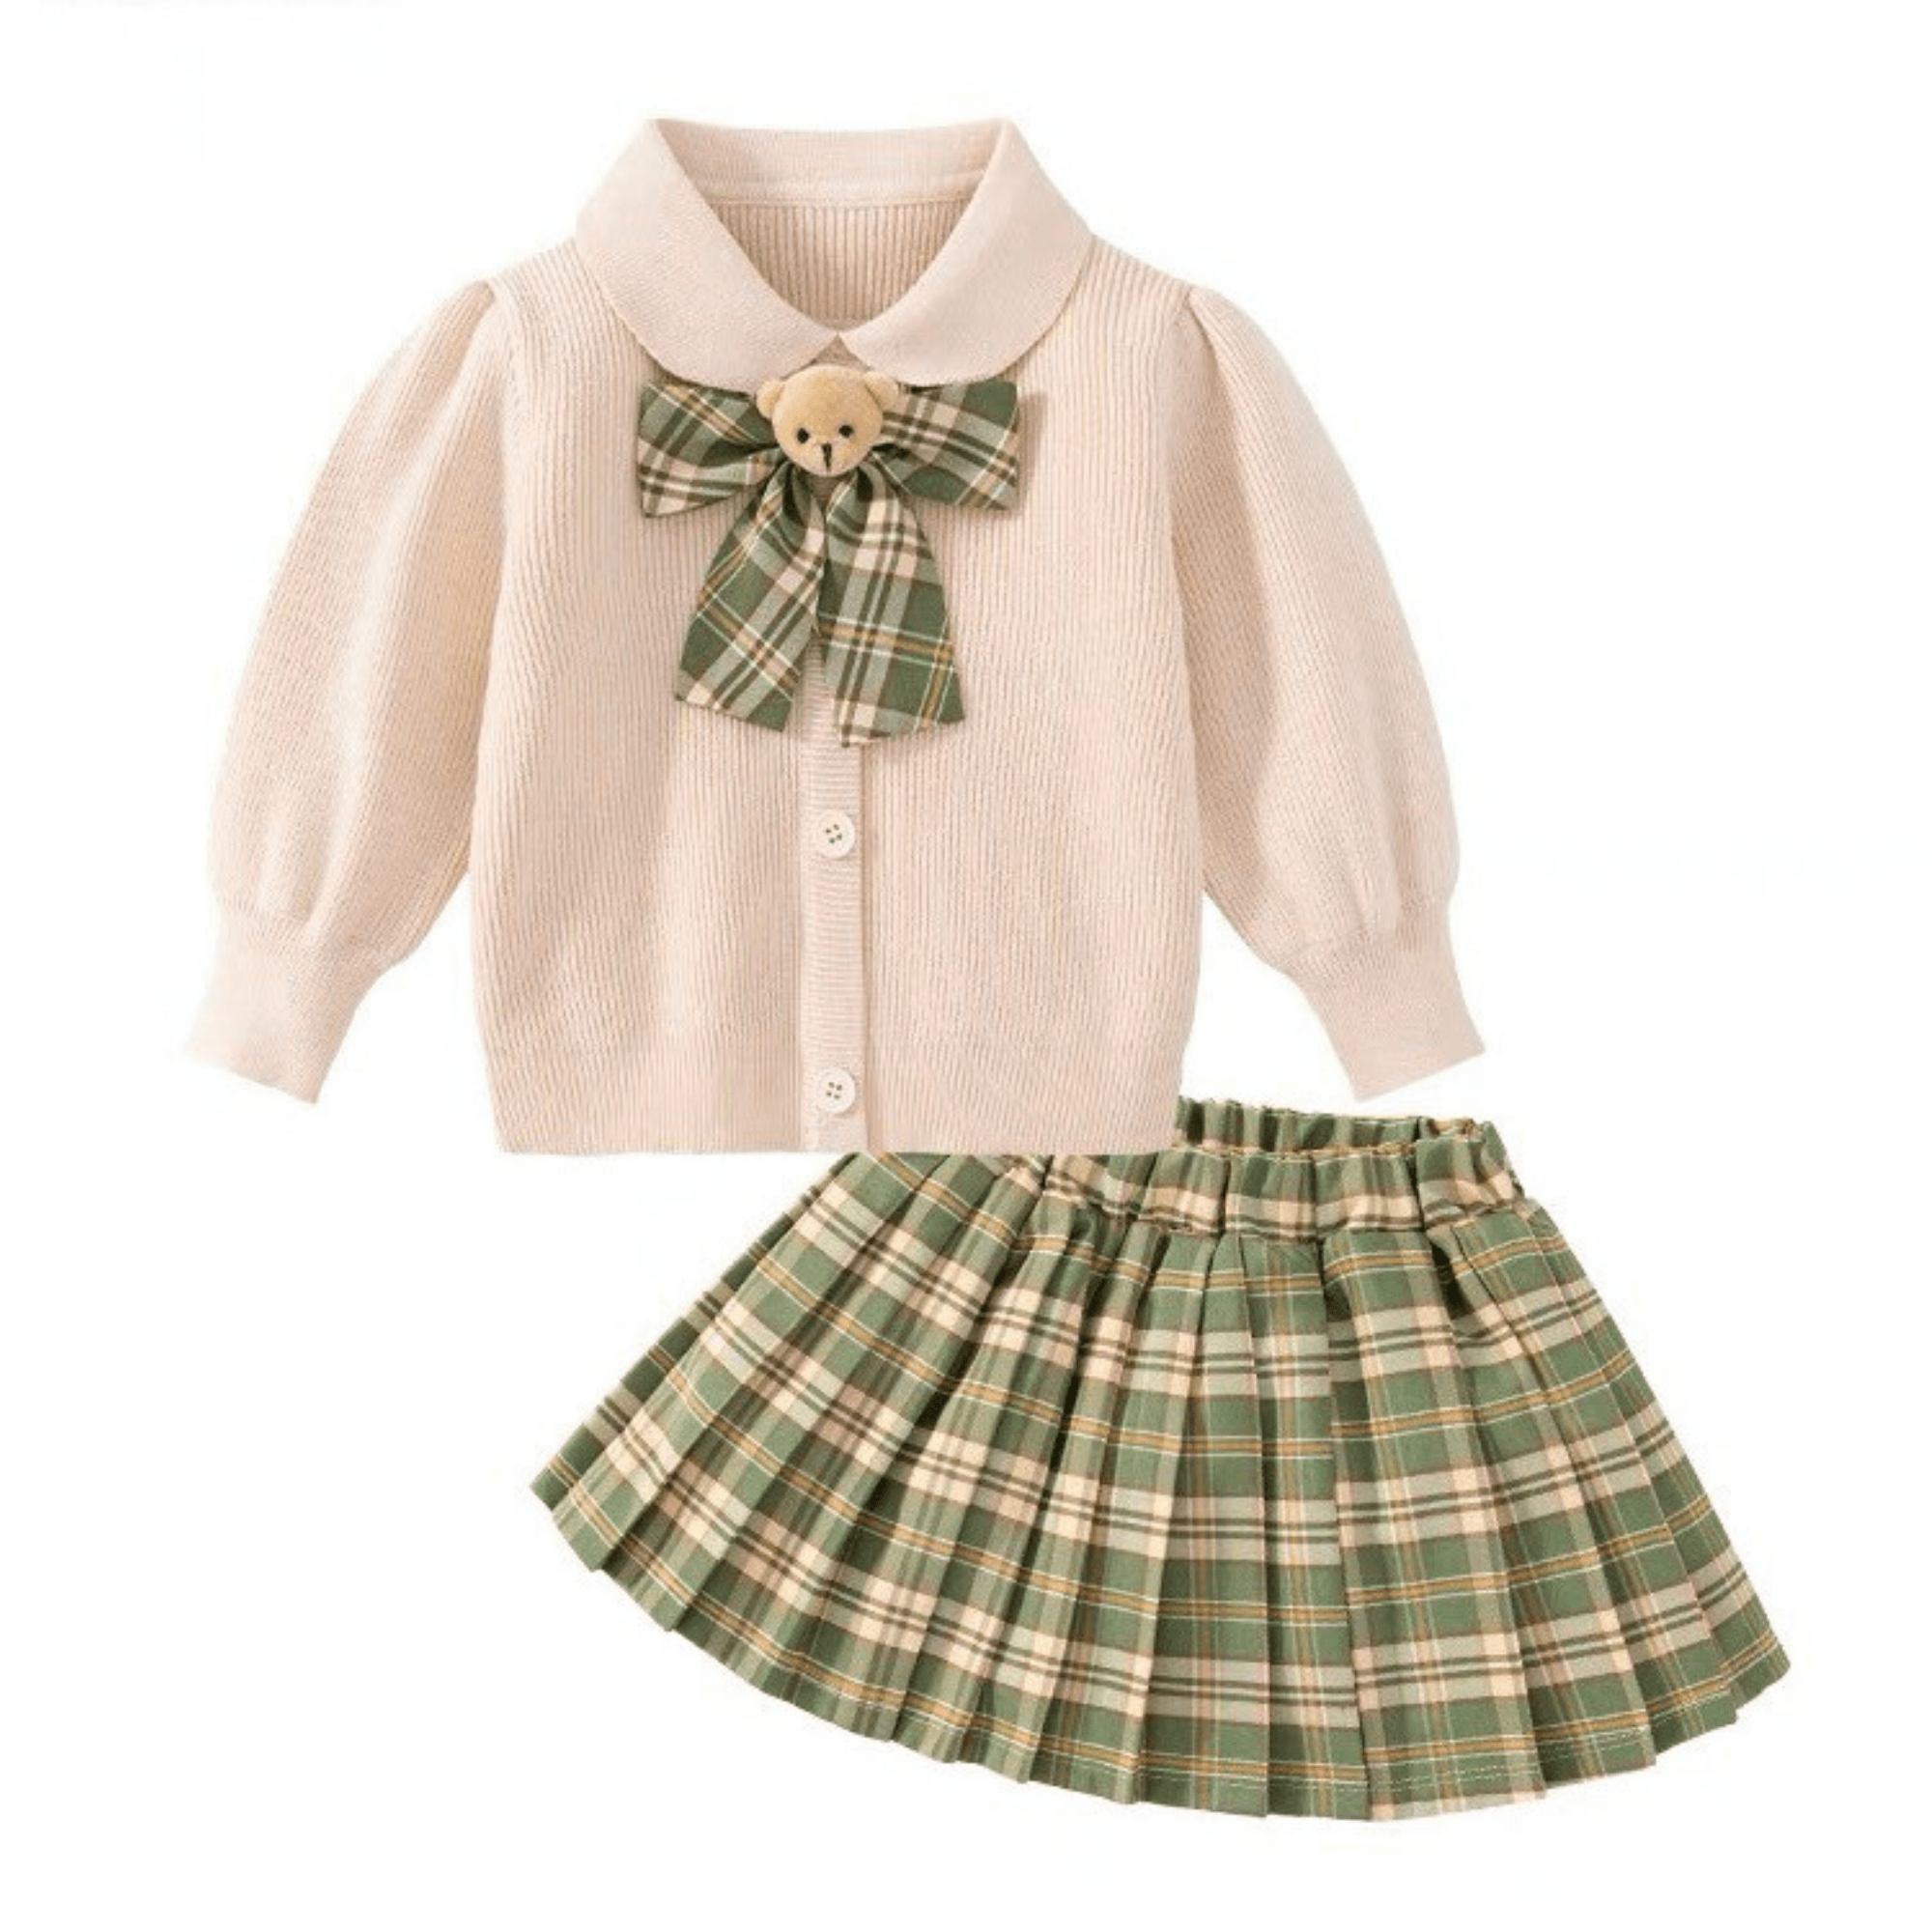 Clothes For Kids Girls Factory Price 100% Wool Dresses New Arrival Each One In Opp Bag Vietnam Manufacturer